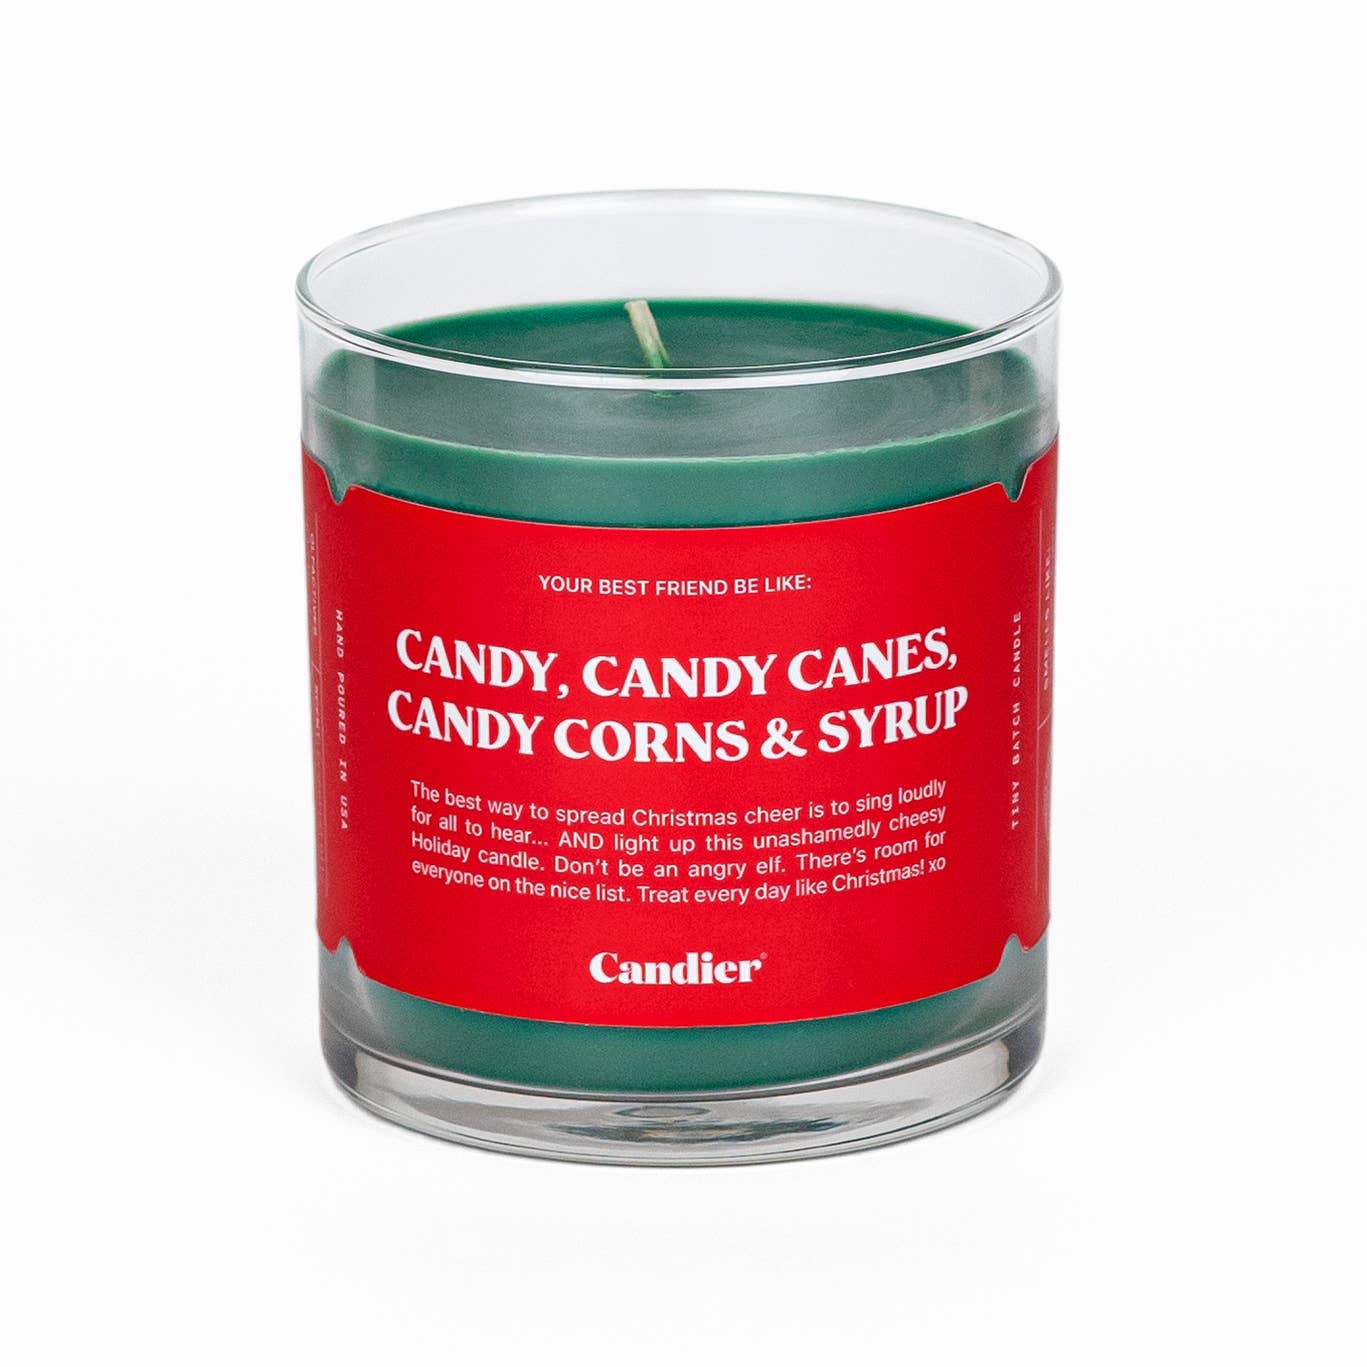 Candy, Candy Canes, Candy Corns & Syrup Candle